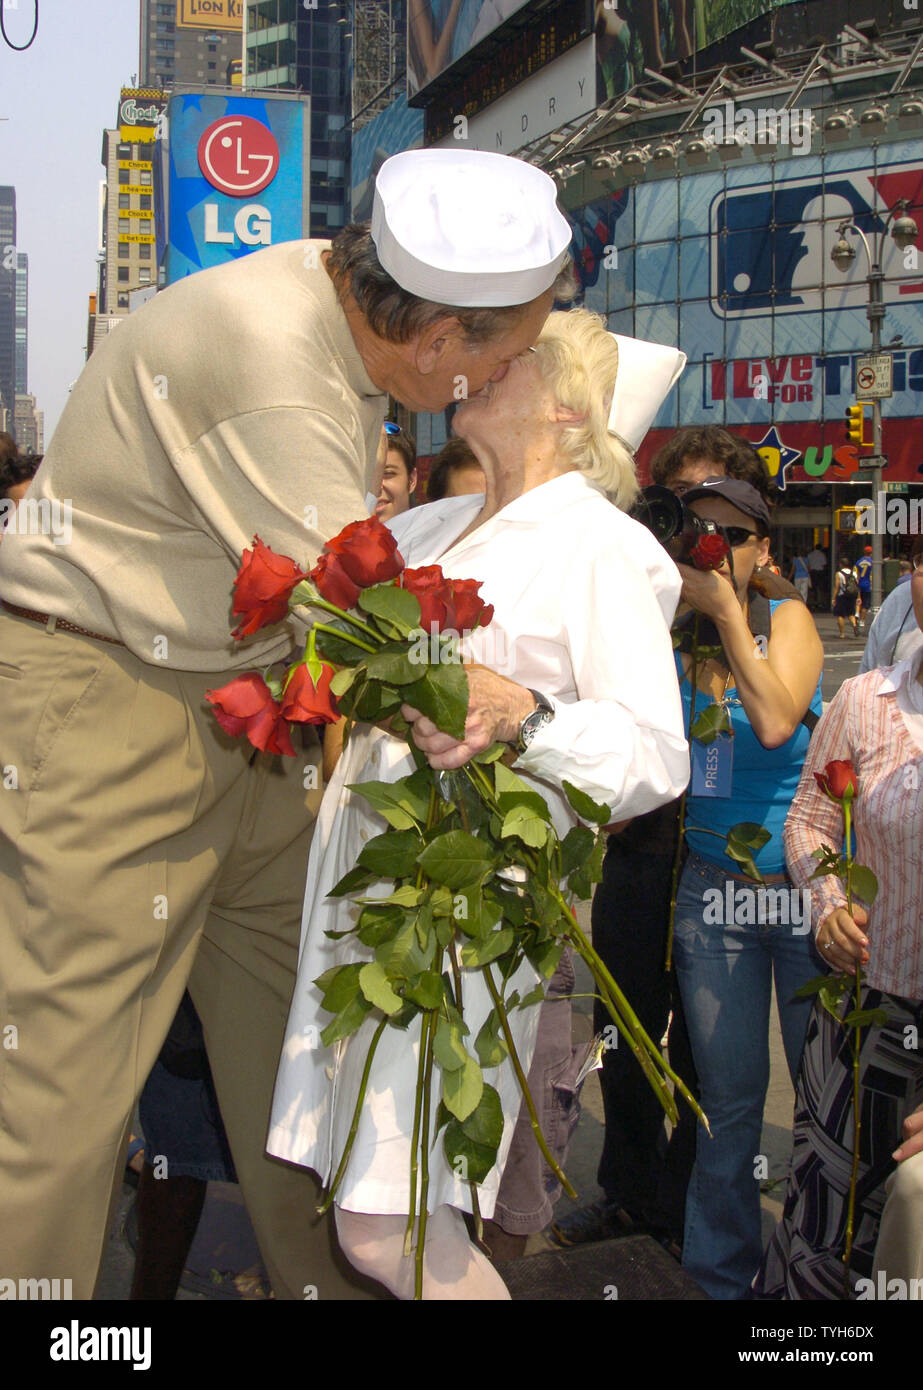 Edith Shain and Carl Muscarello are shown recreating a famous photo at the 60th Anniversary of the end of World War II in Times Square on August 14, 2005.  They were recreating the famous pose from the Alfred Eisenstadt photograph celebrating the Allied victory in the war. They claim to be the original couple in the photograph.   (UPI Photo/Robin Platzer) Stock Photo